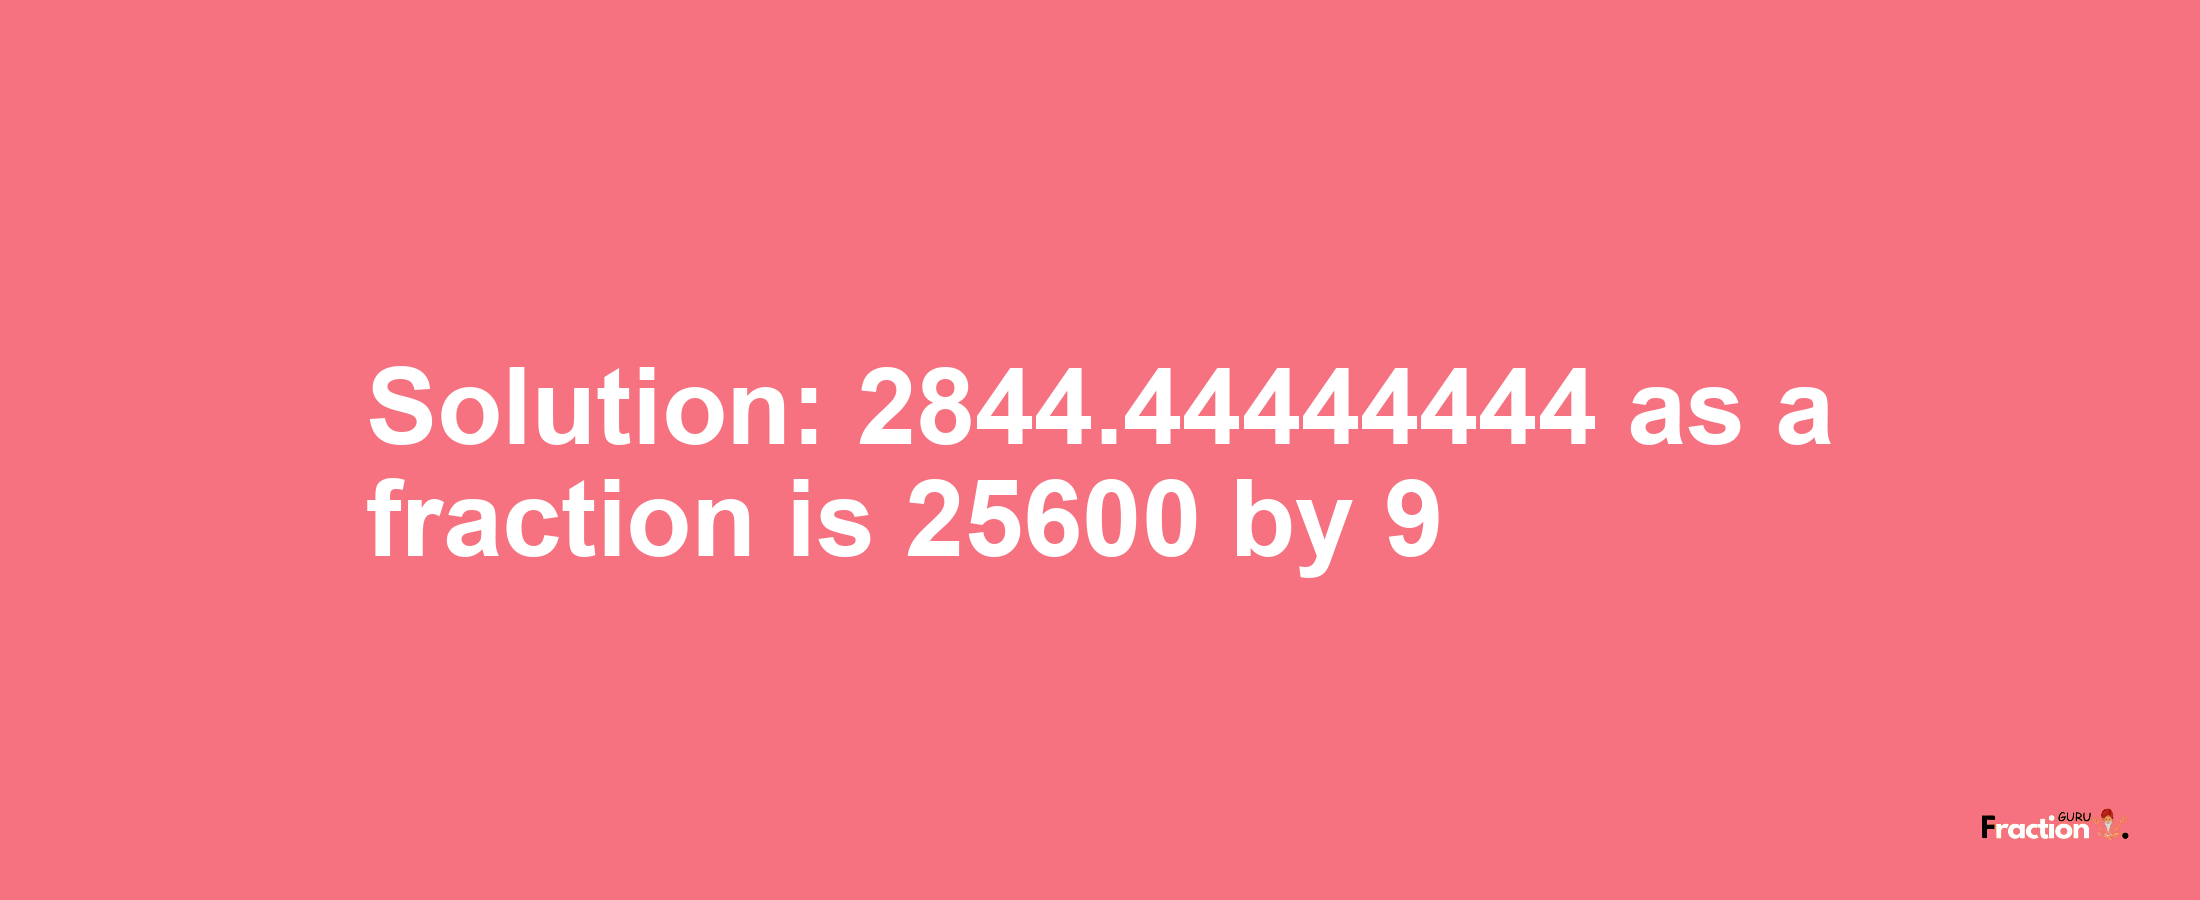 Solution:2844.44444444 as a fraction is 25600/9